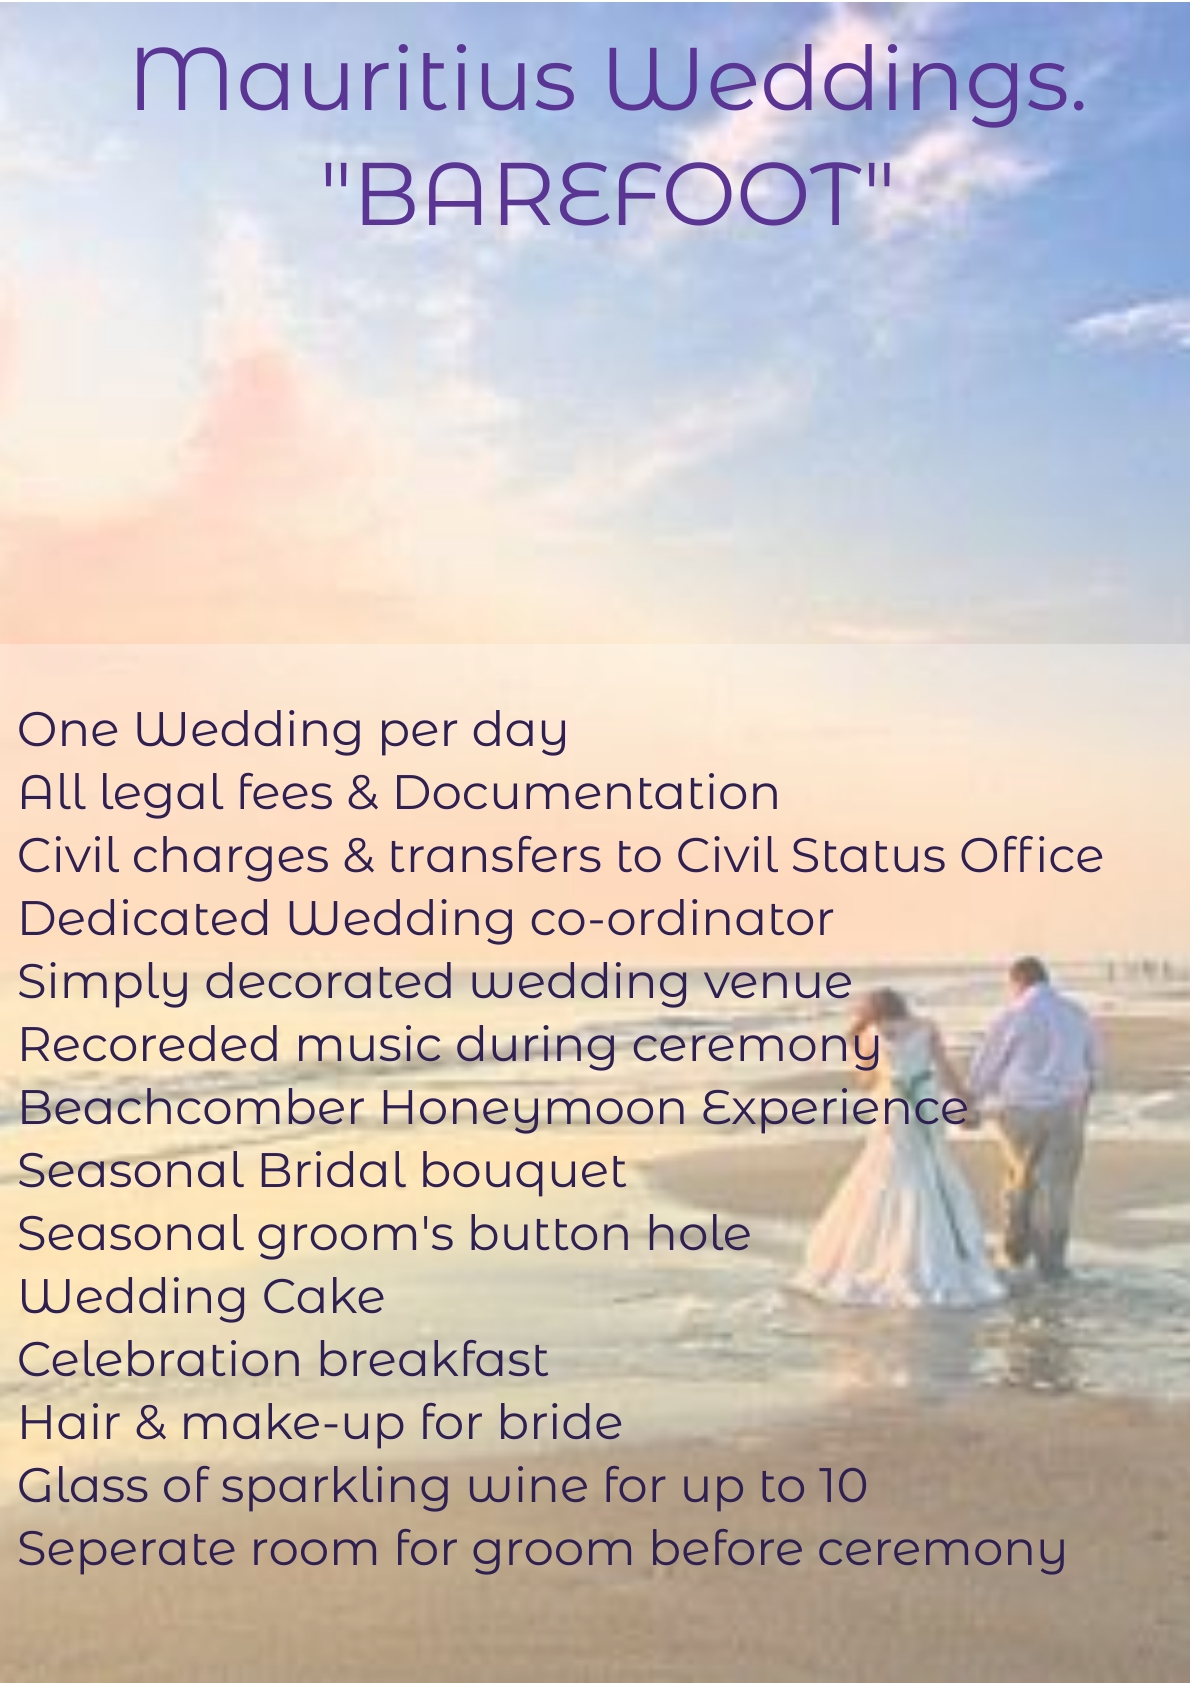 Beachcomber Wedding Packages in Mauritius